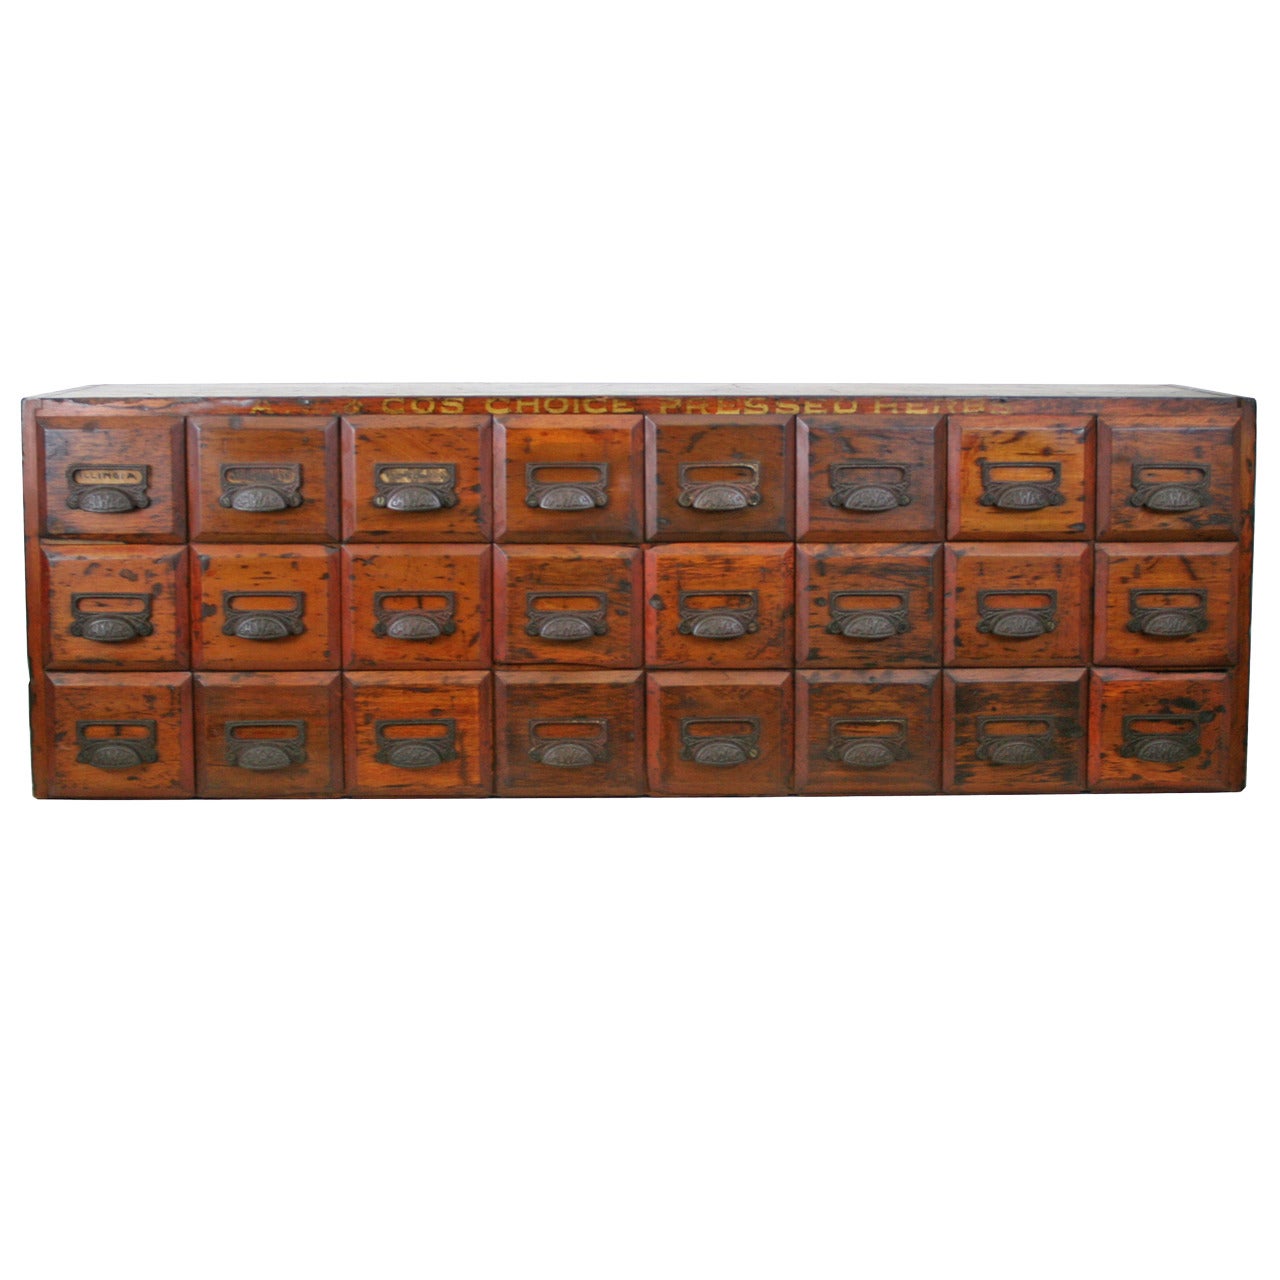 Rare A.W. and Company American Apothecary Cabinet C1875